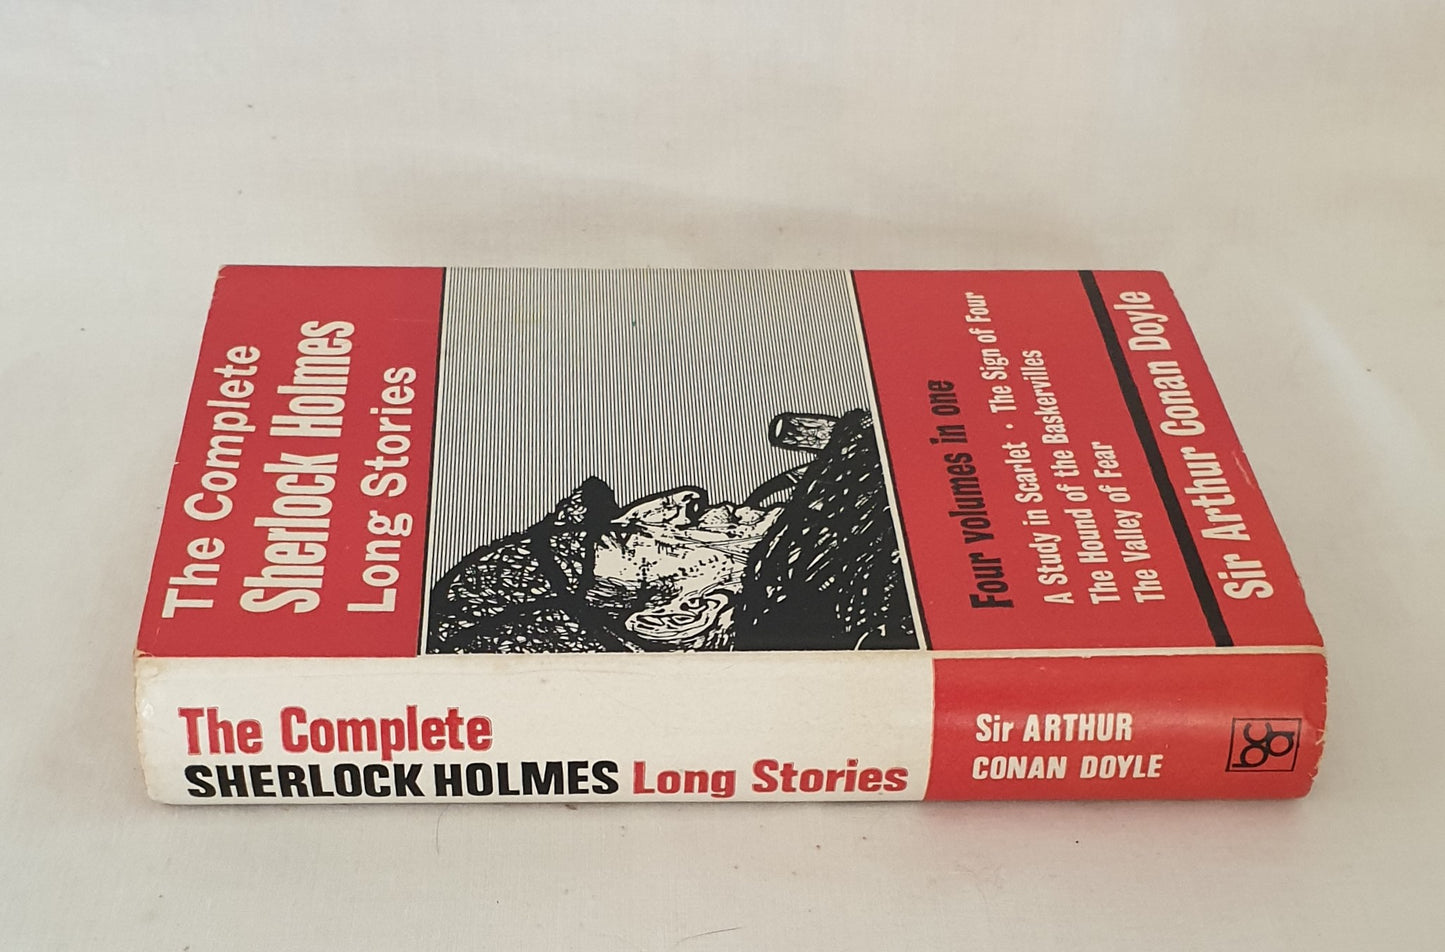 The Complete Sherlock Holmes: Long Stories by Sir Arthur Conan Doyle